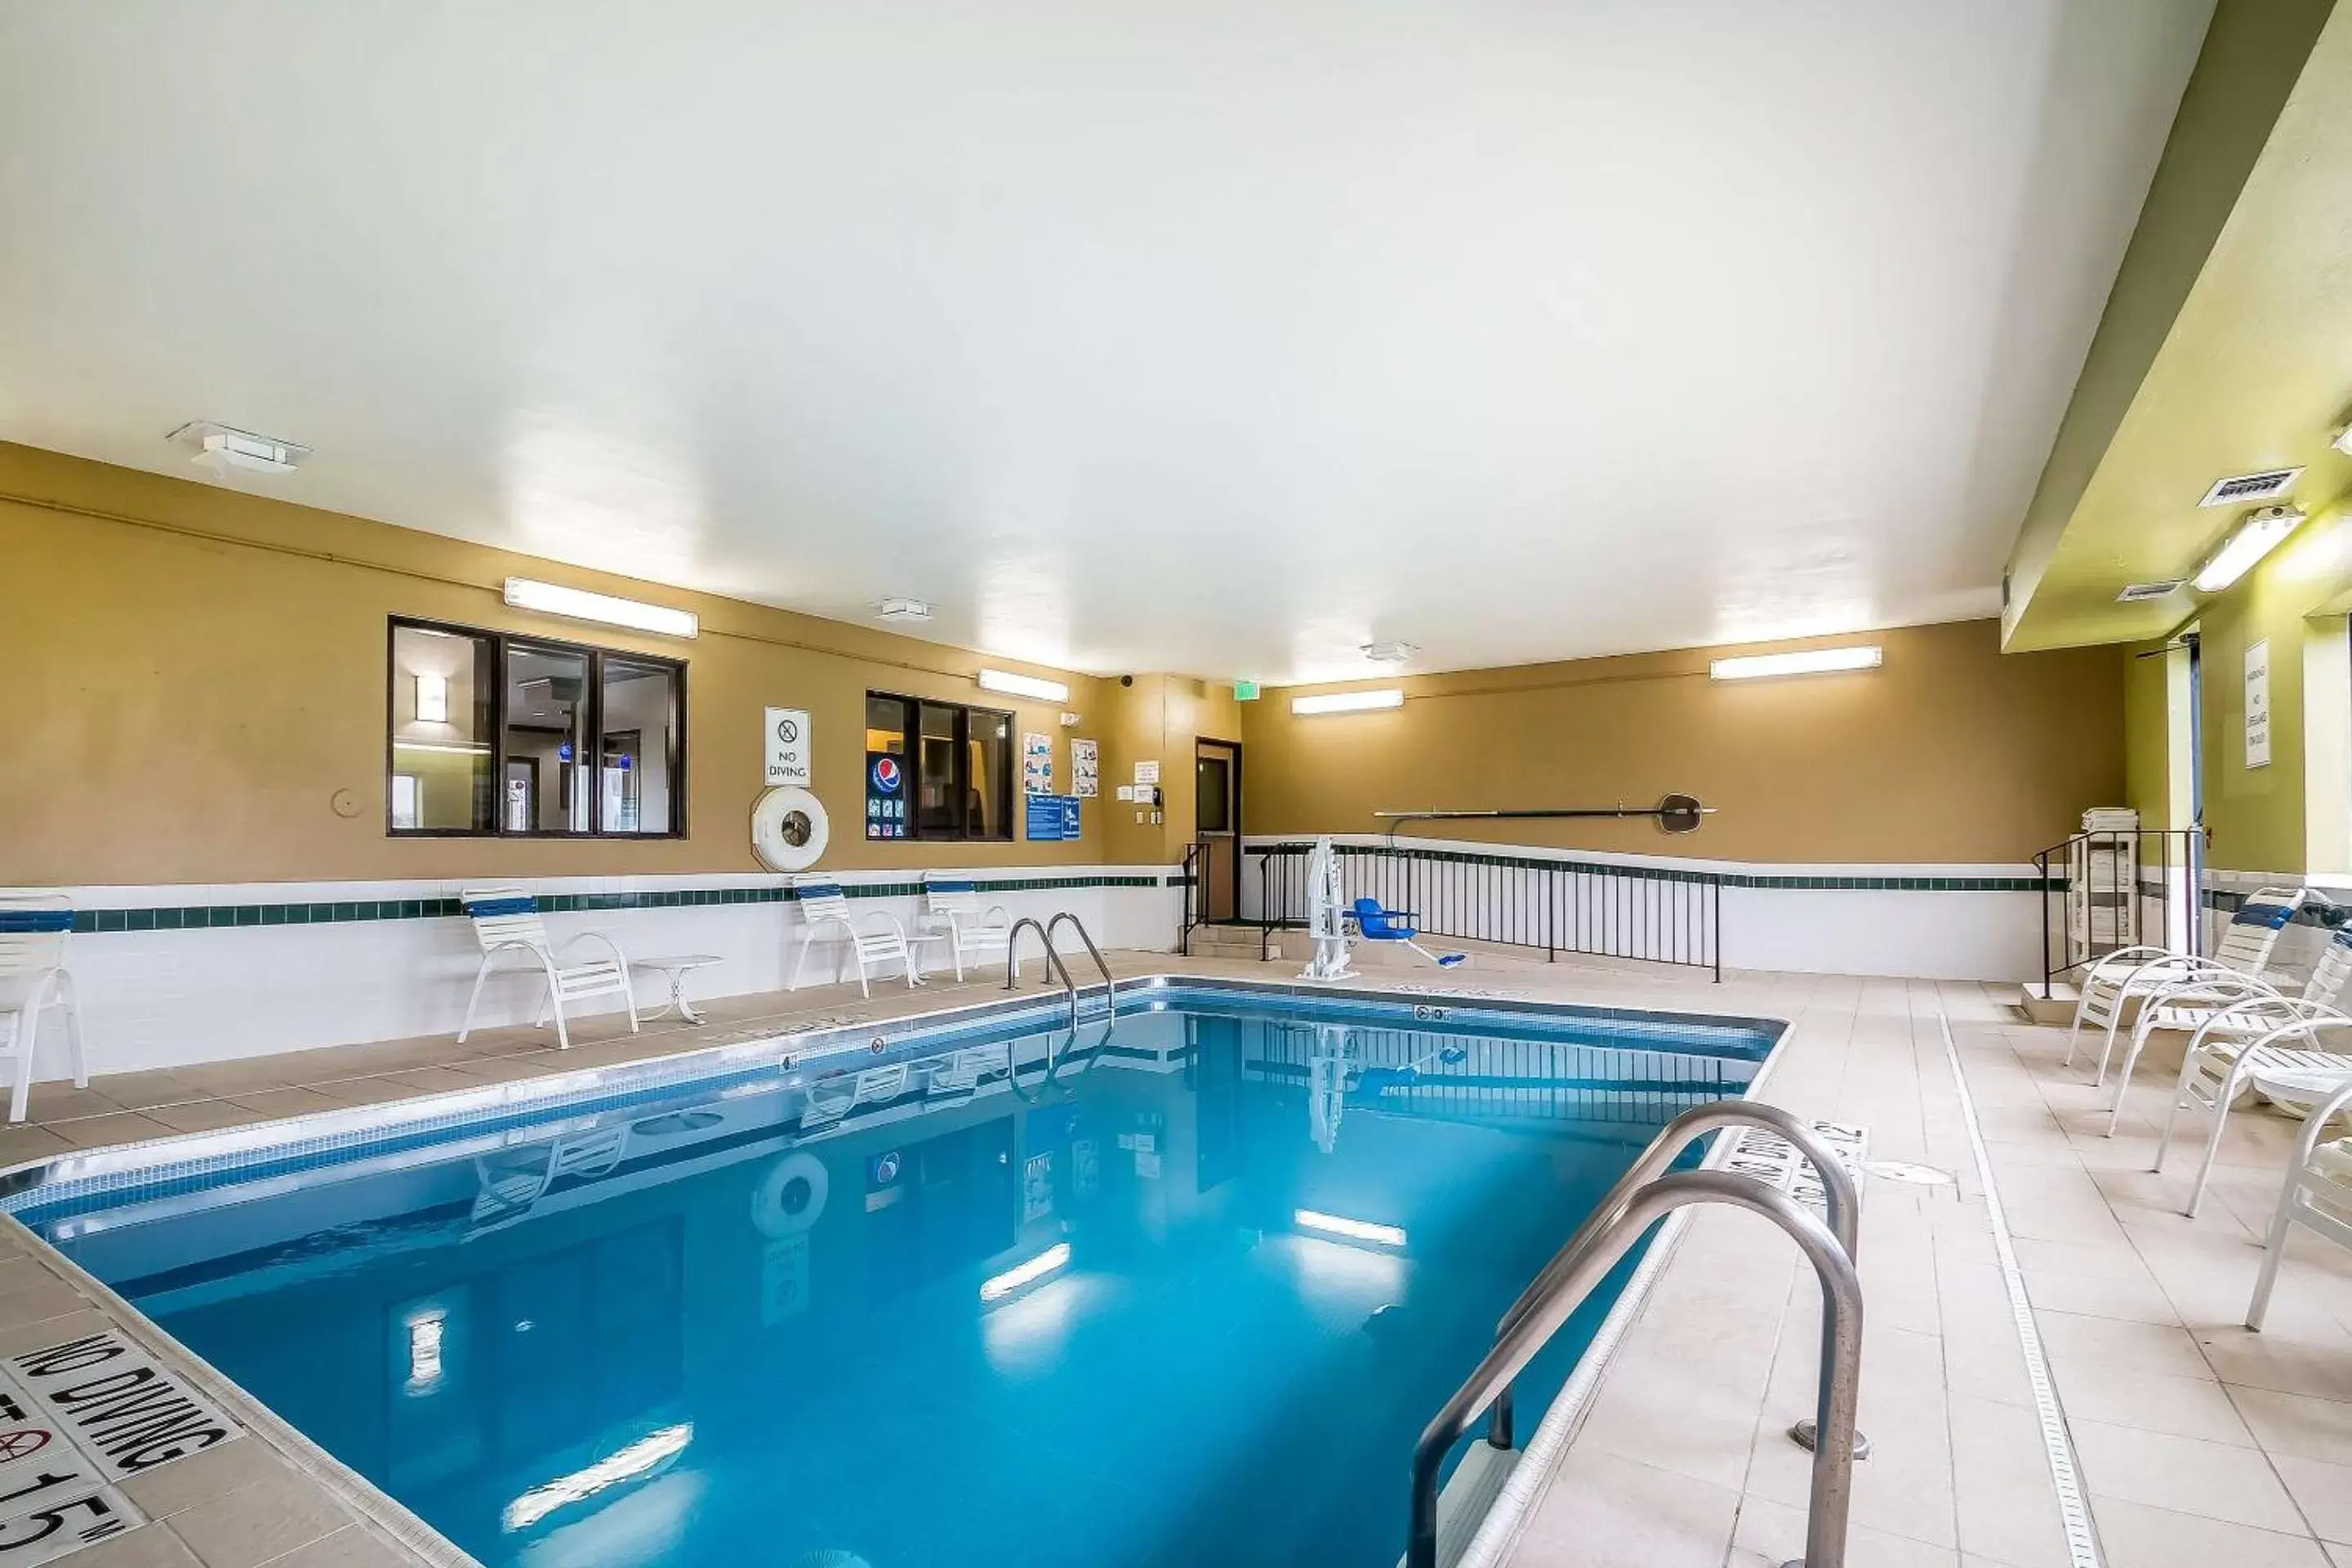 On site, Swimming Pool in Quality Inn - Coralville